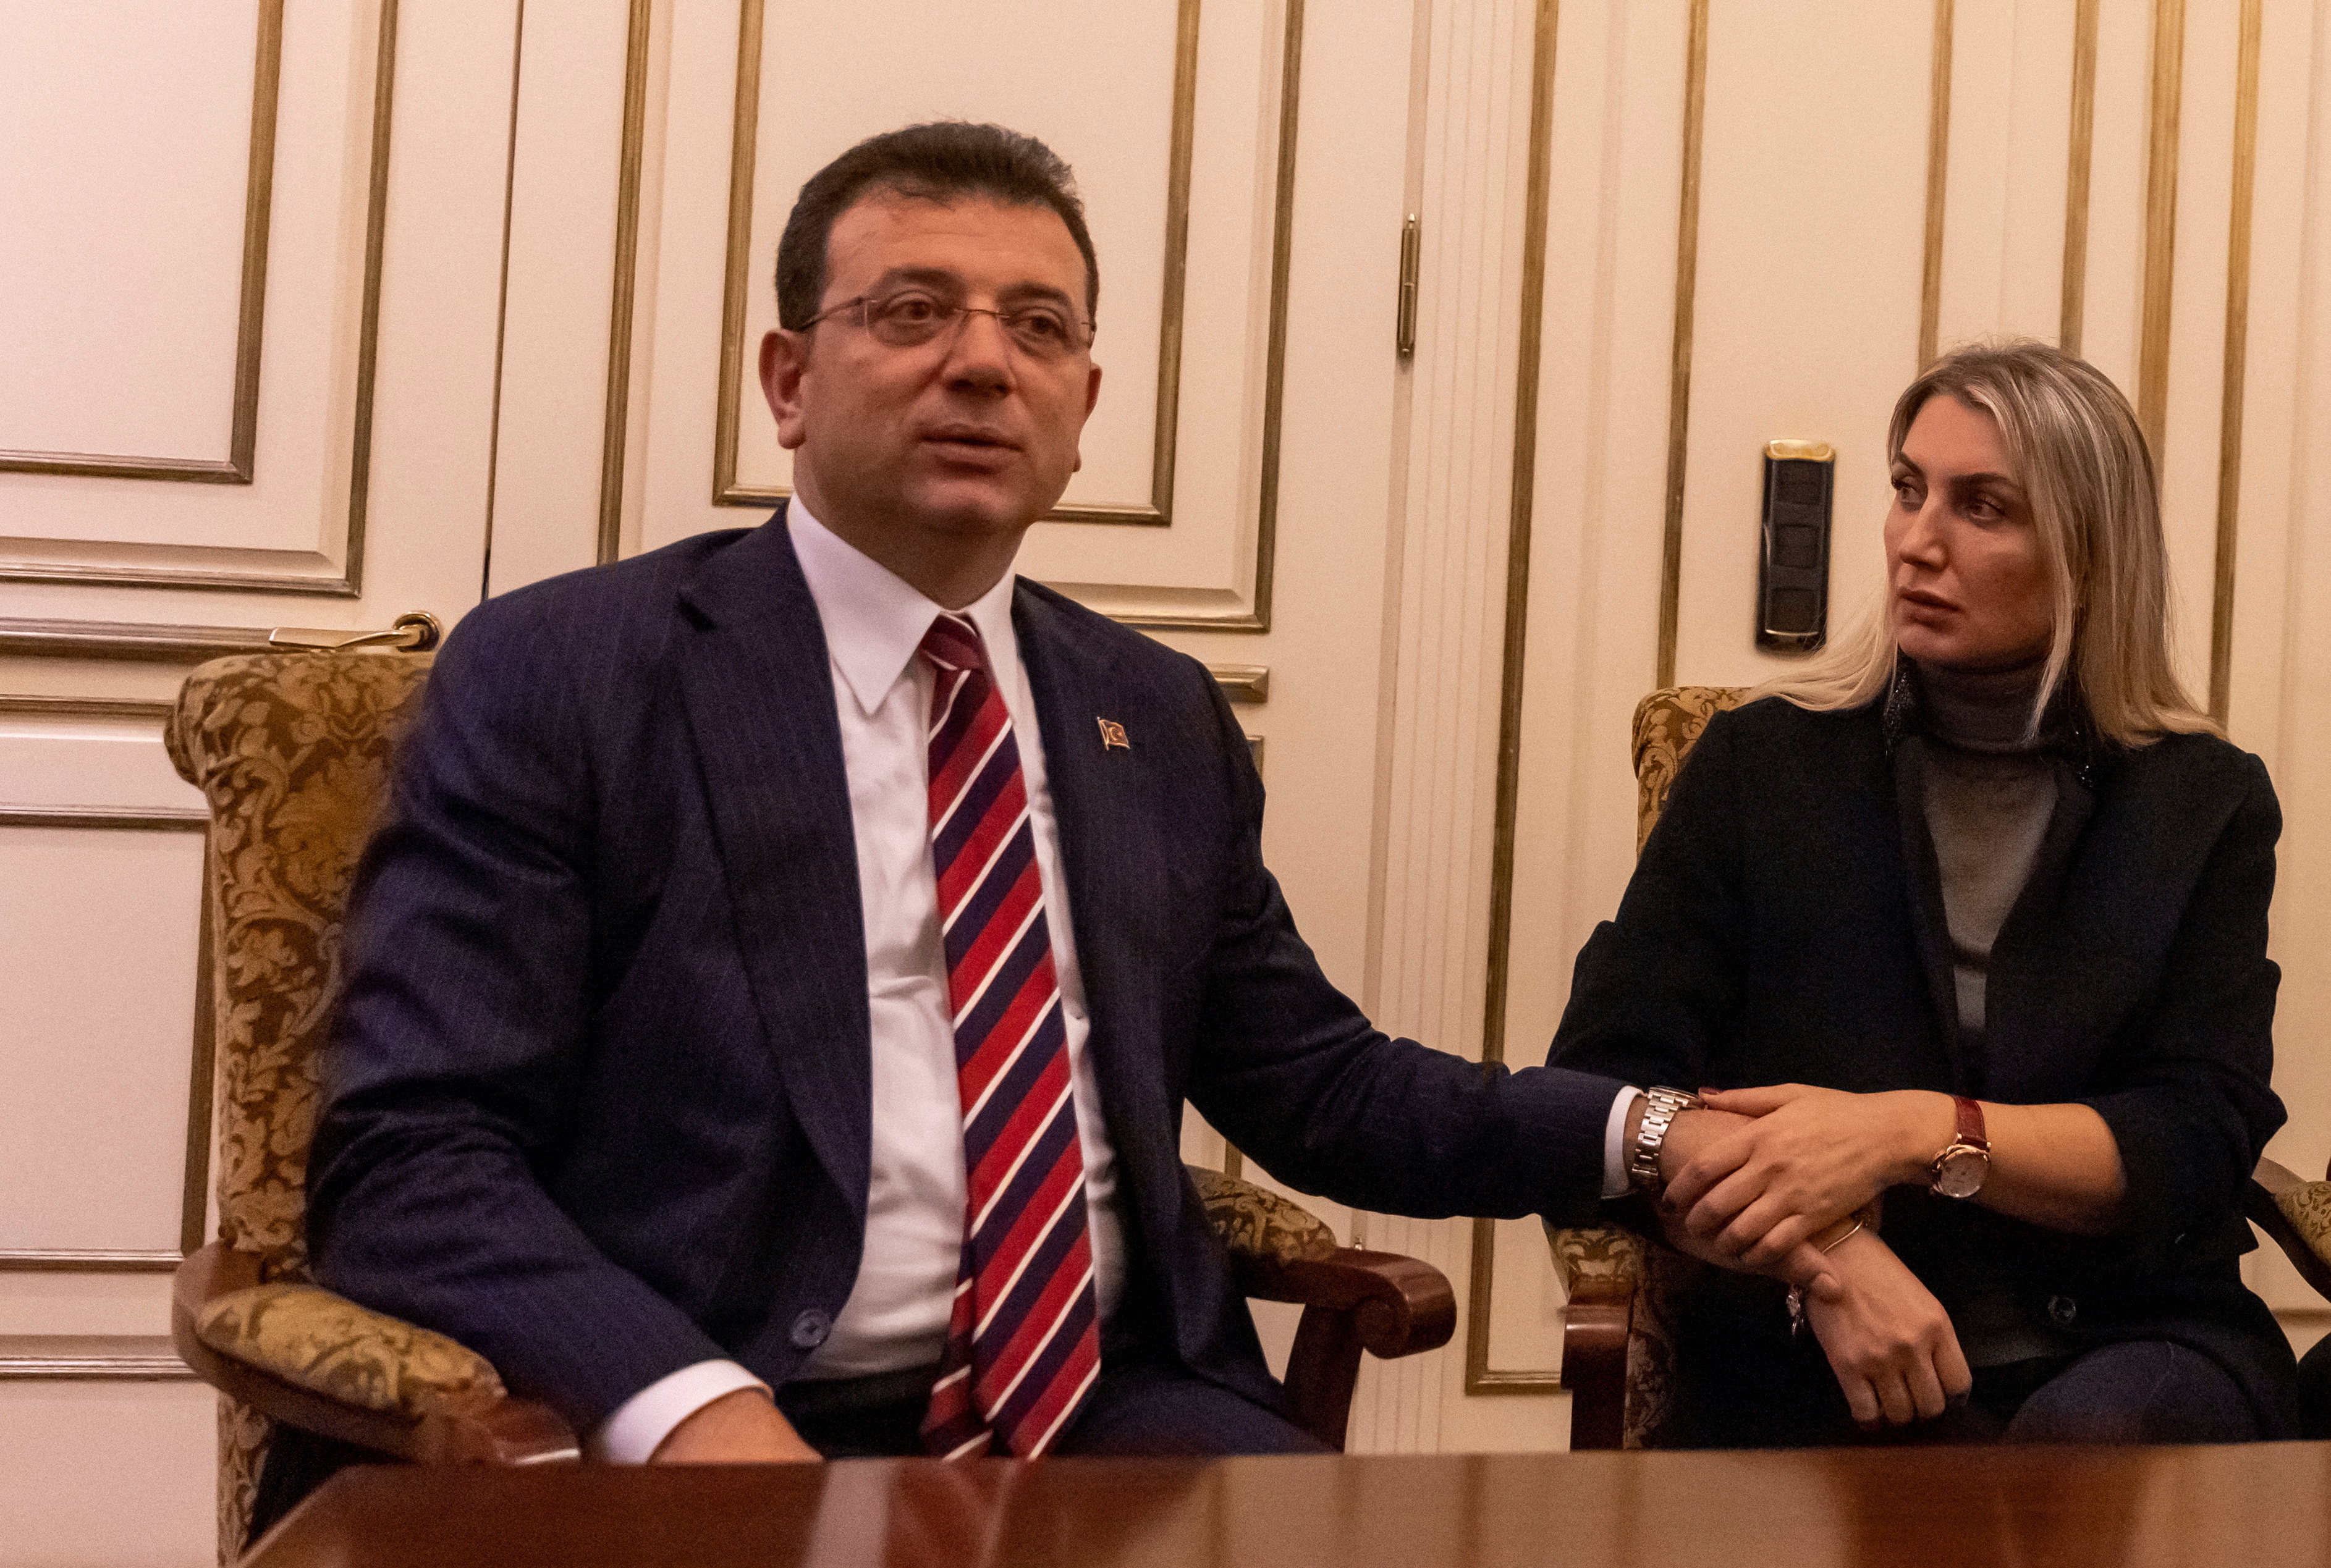 Istanbul Mayor Ekrem Imamoglu and his wife Dilek sit at his office in Istanbul